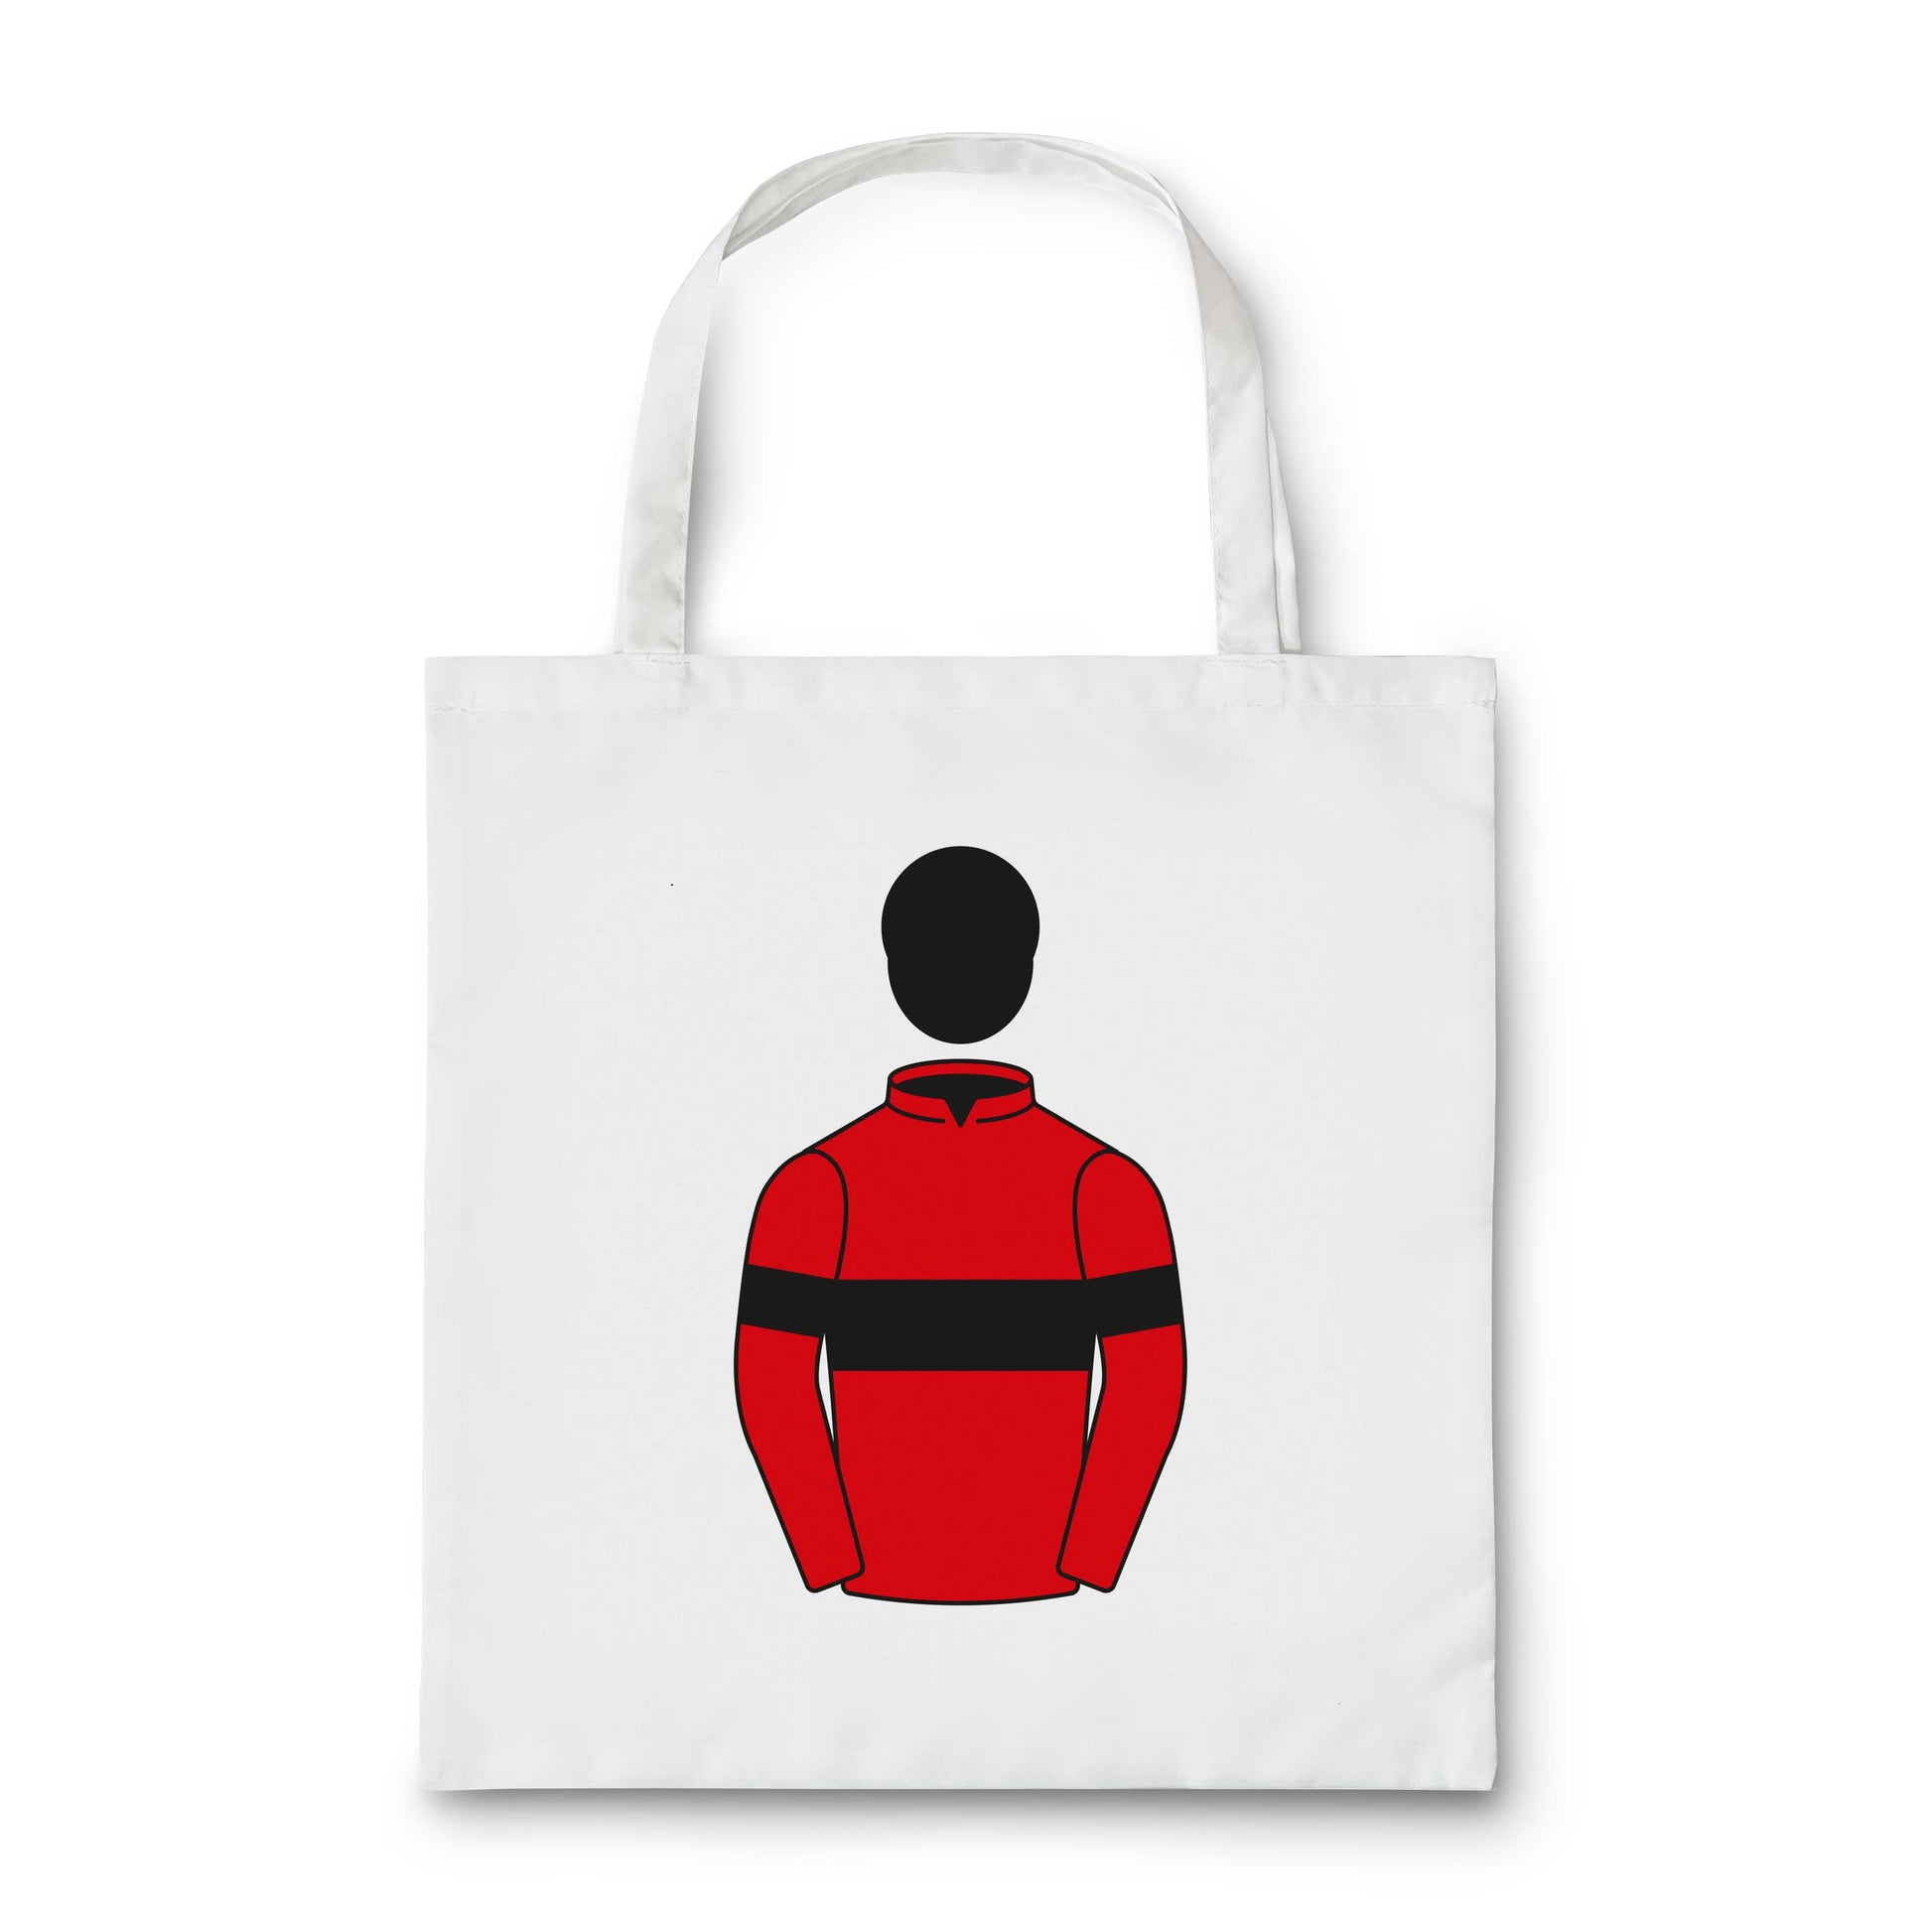 Charmian Hill Tote Bag - Tote Bag - Hacked Up